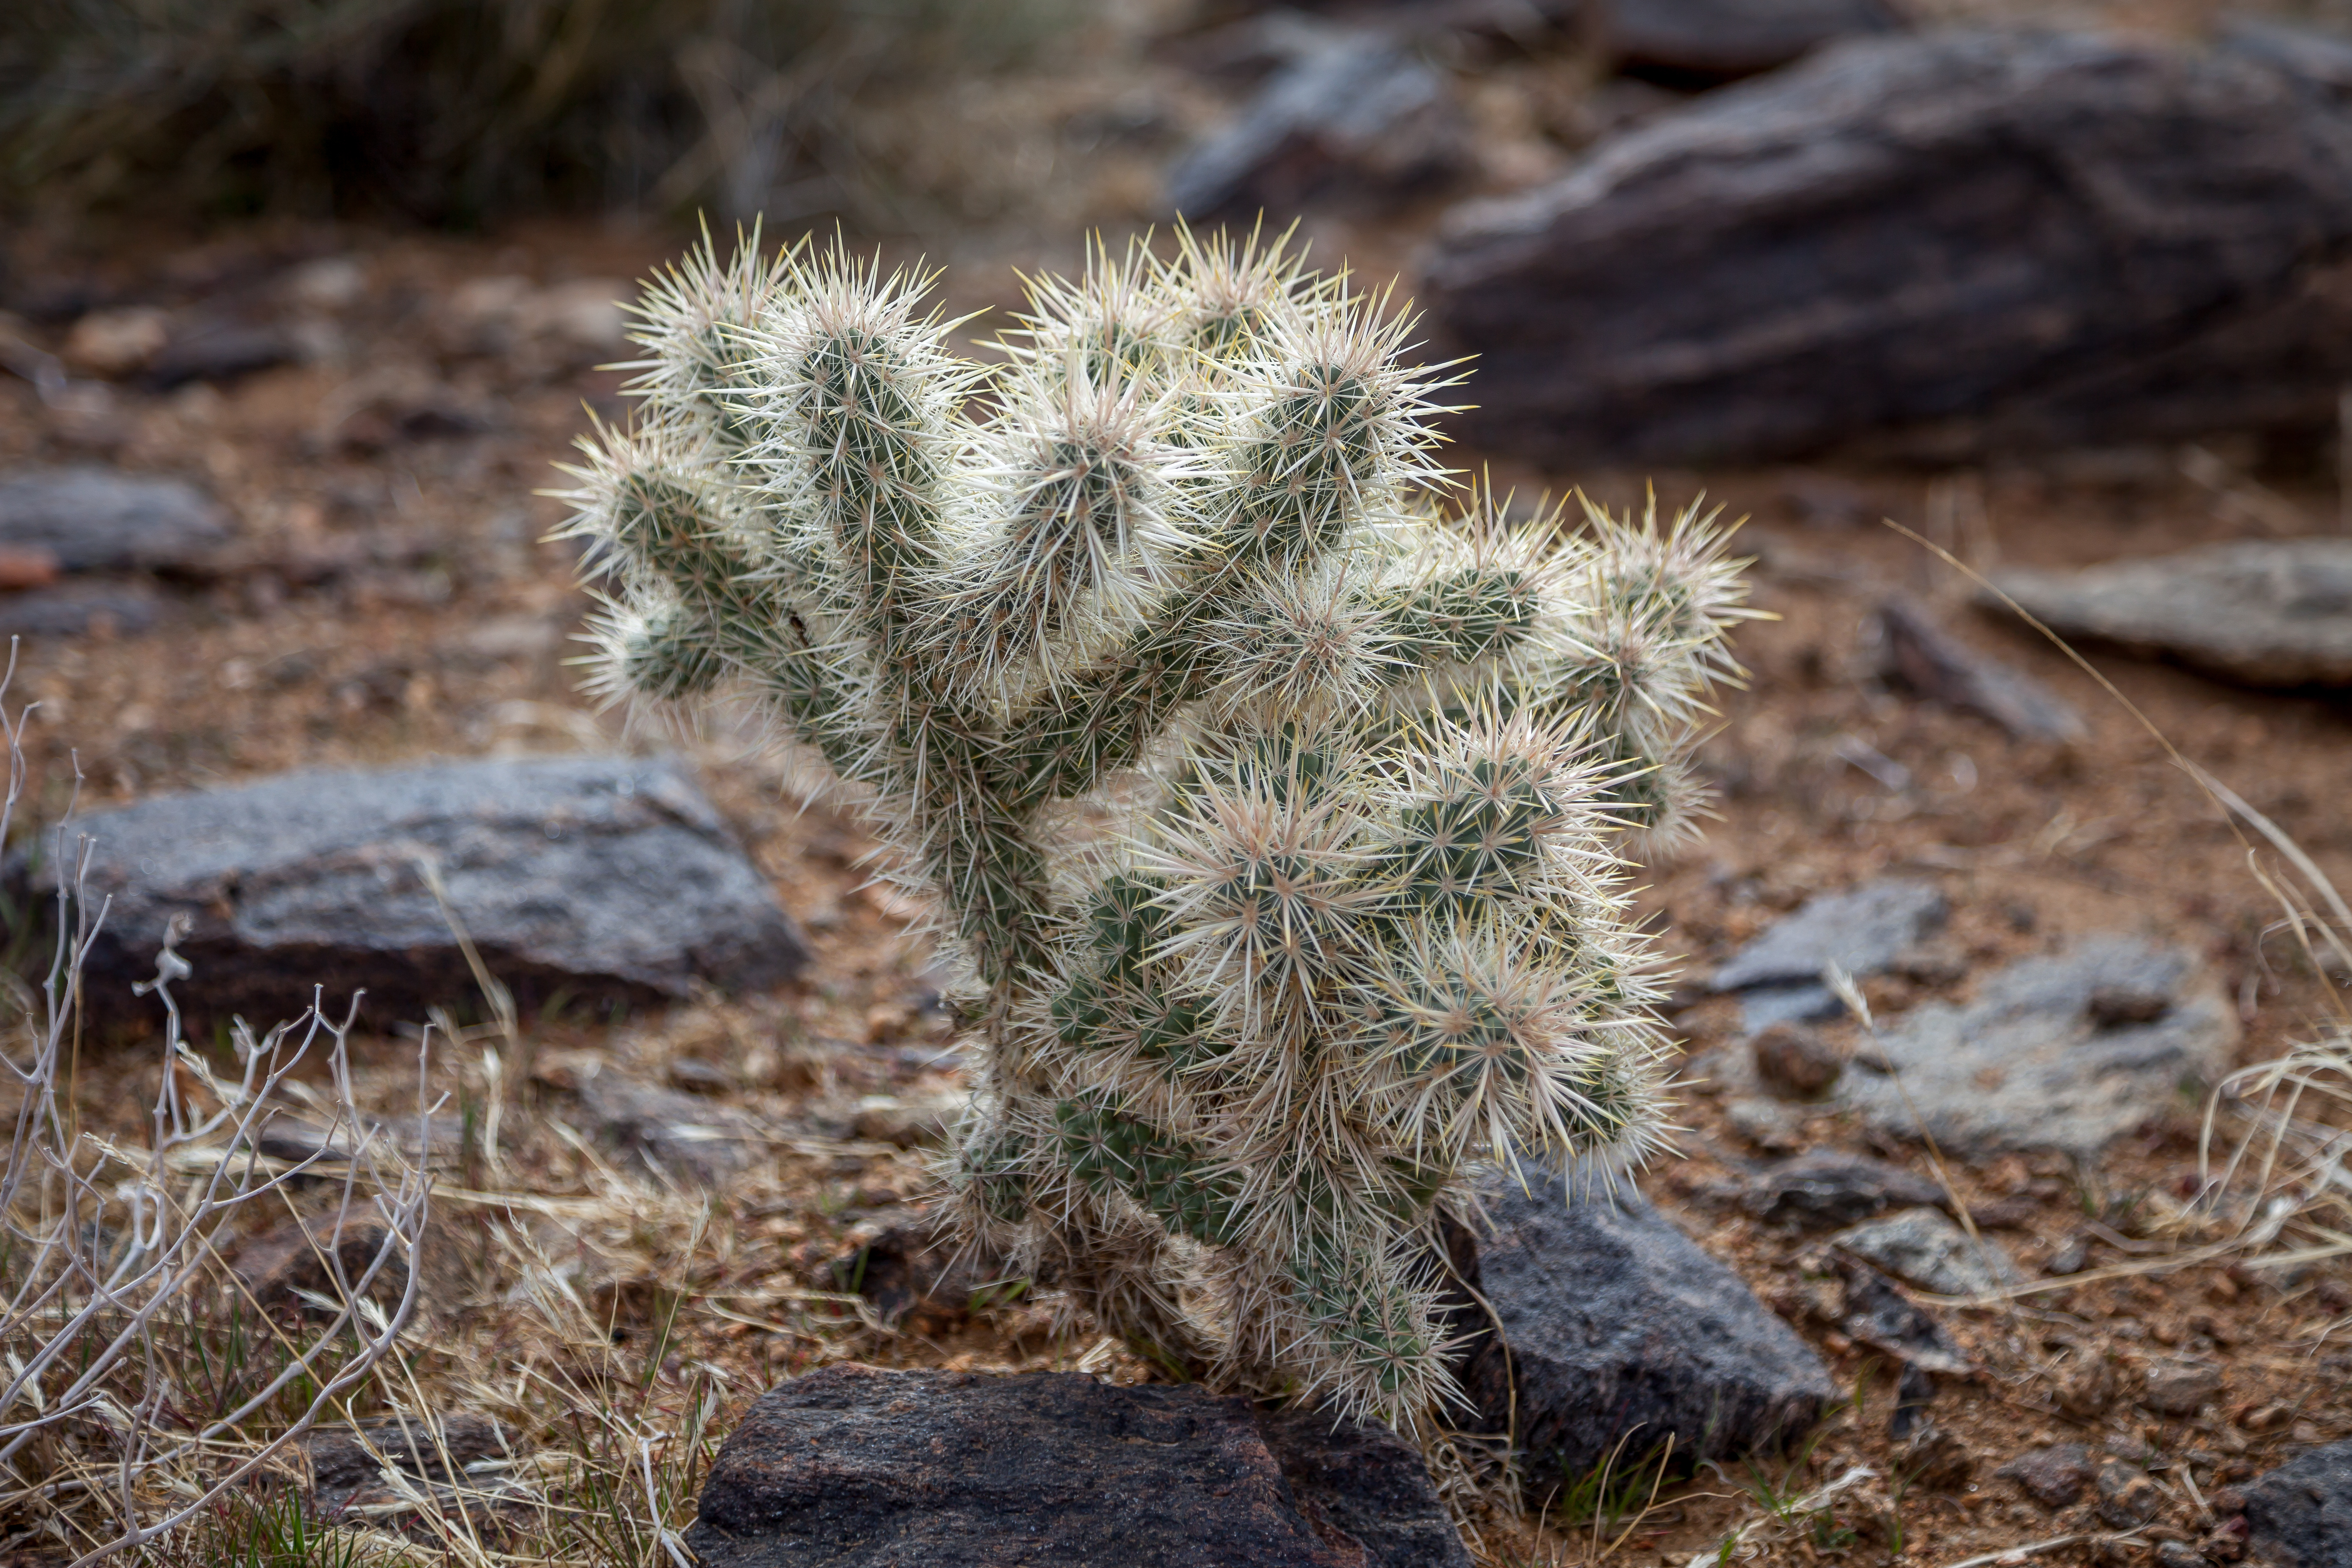 a cactus in Joshua Tree National Park